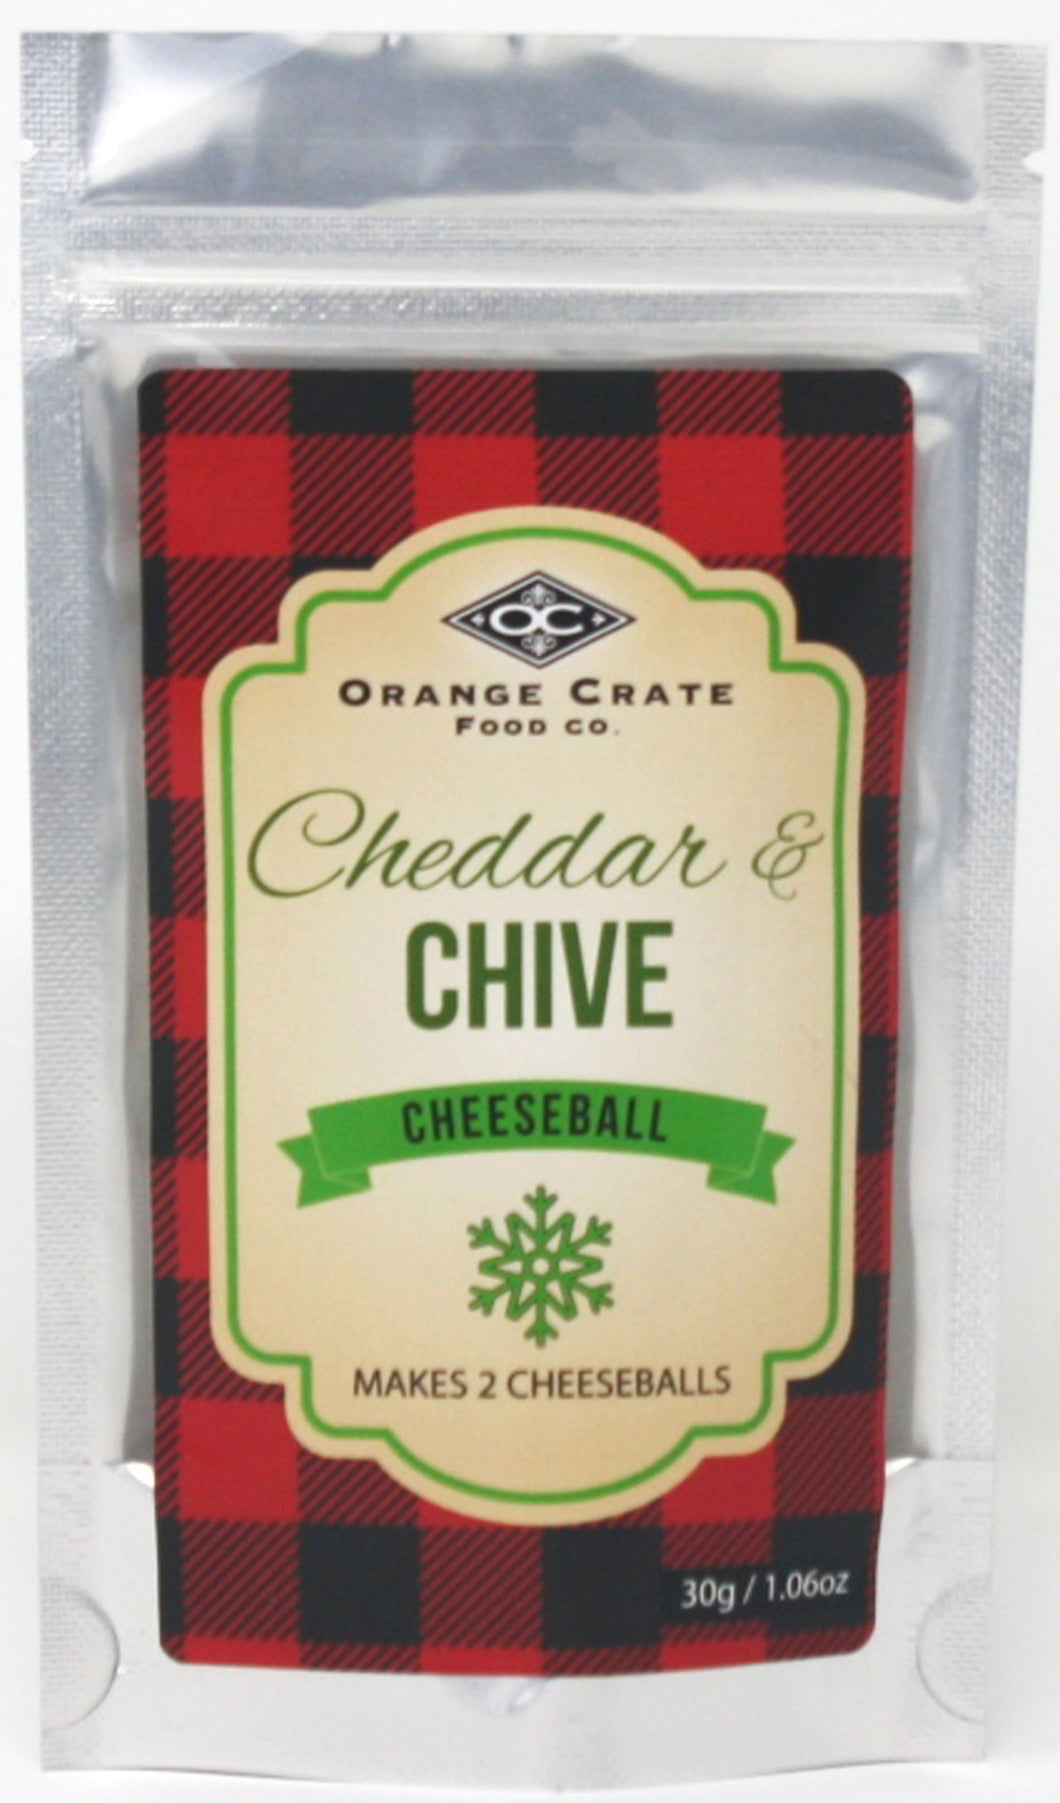 Chedder and Chive Cheeseball